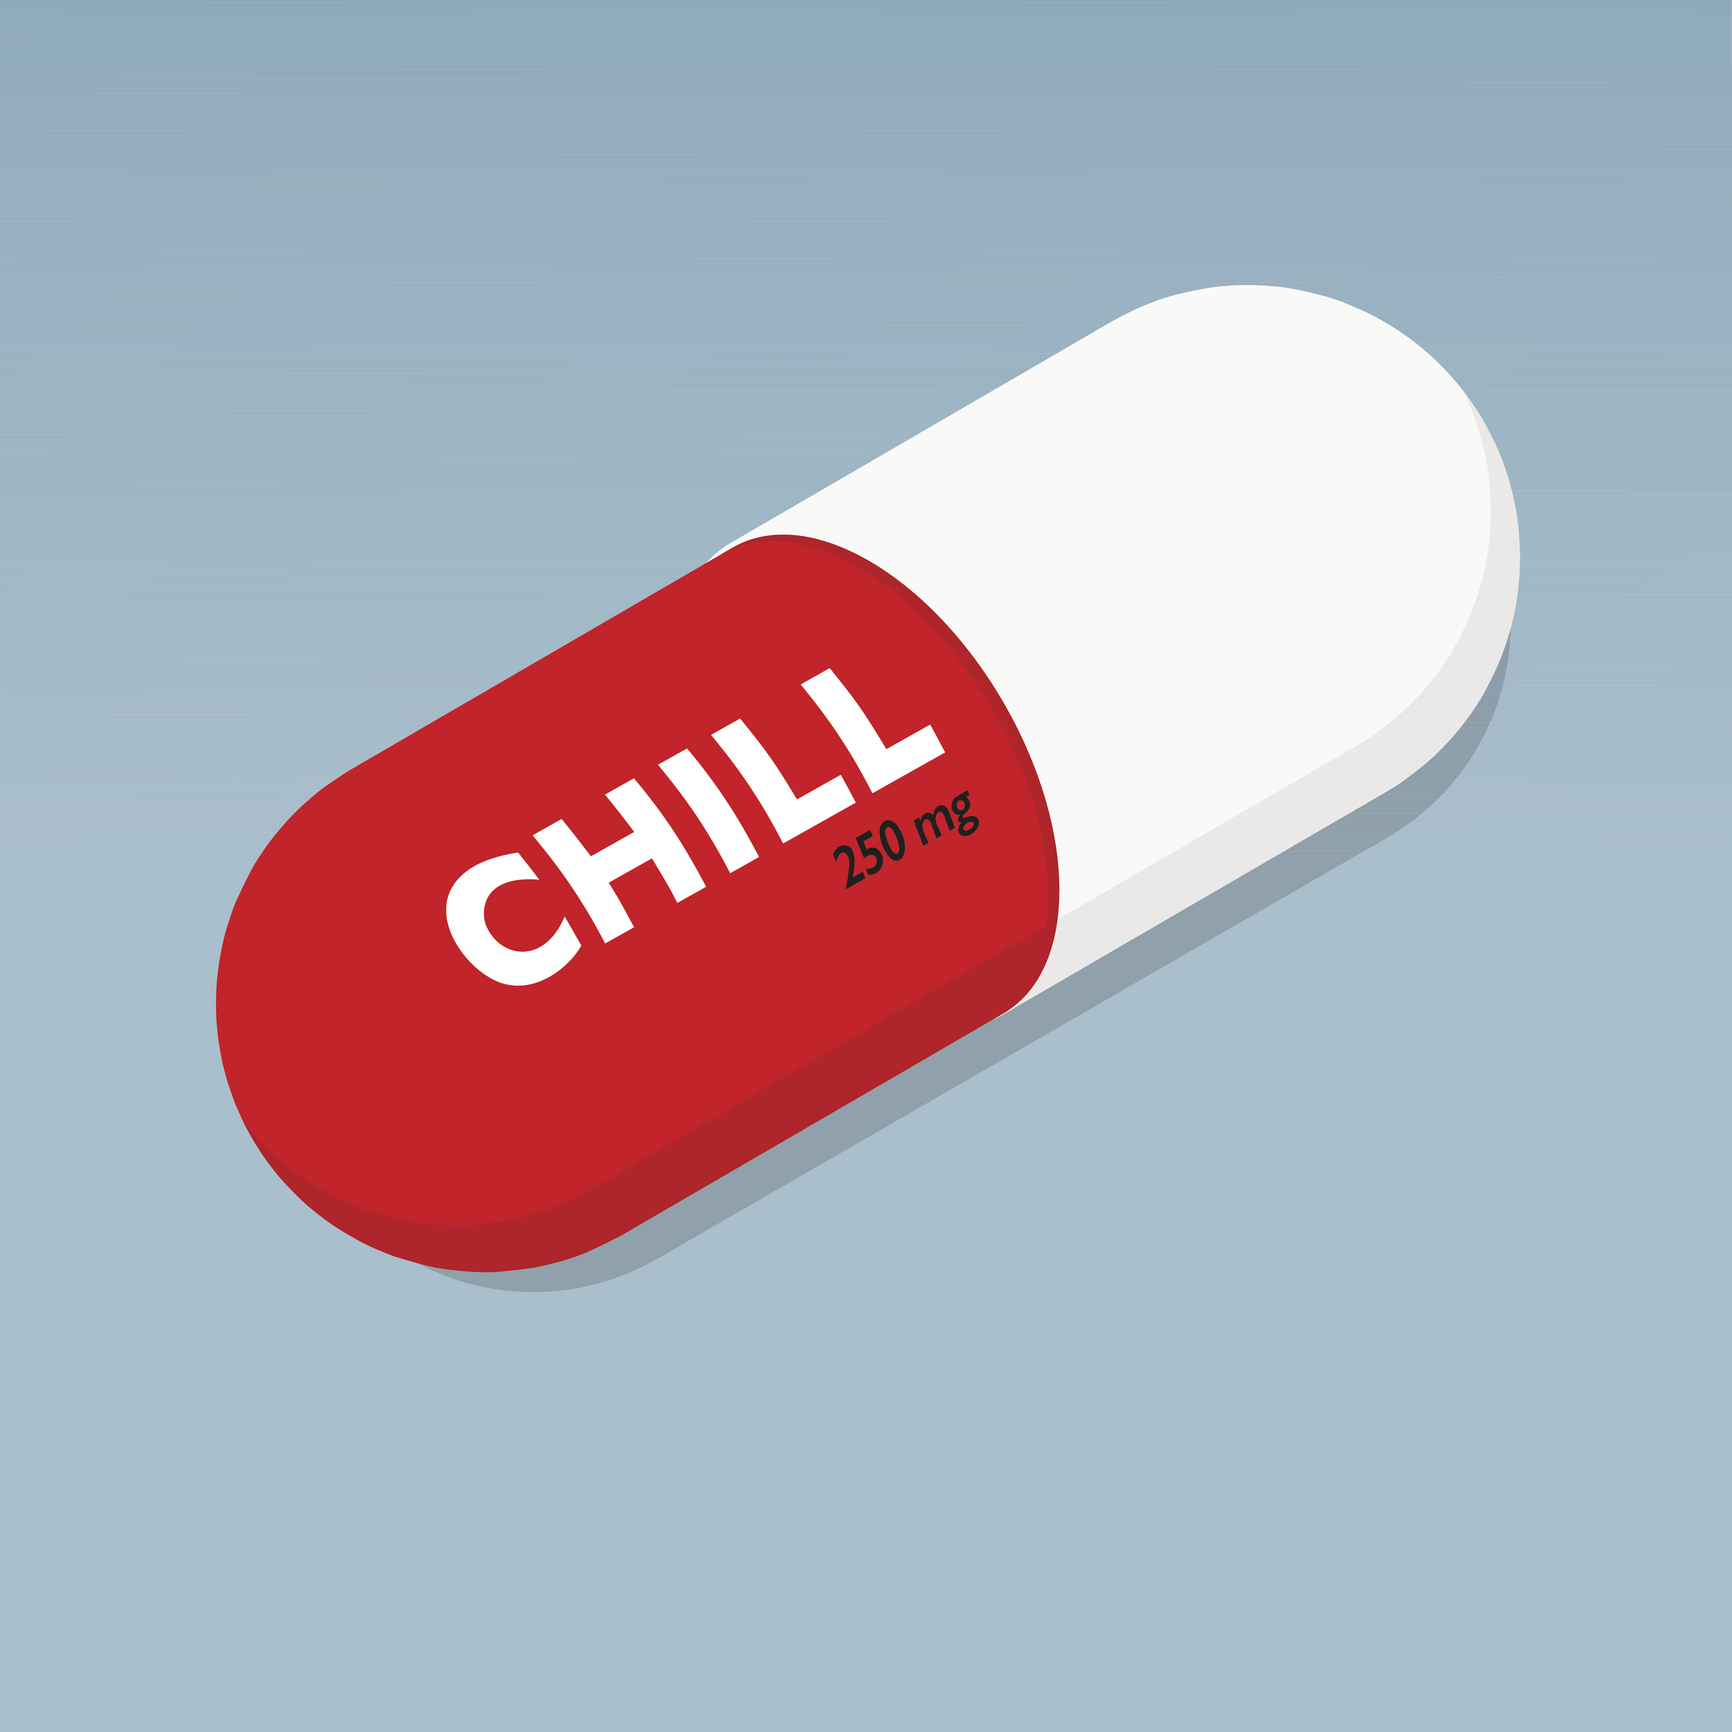 Illustration of a capsule with &quot;CHILL 250 mg&quot; printed on it